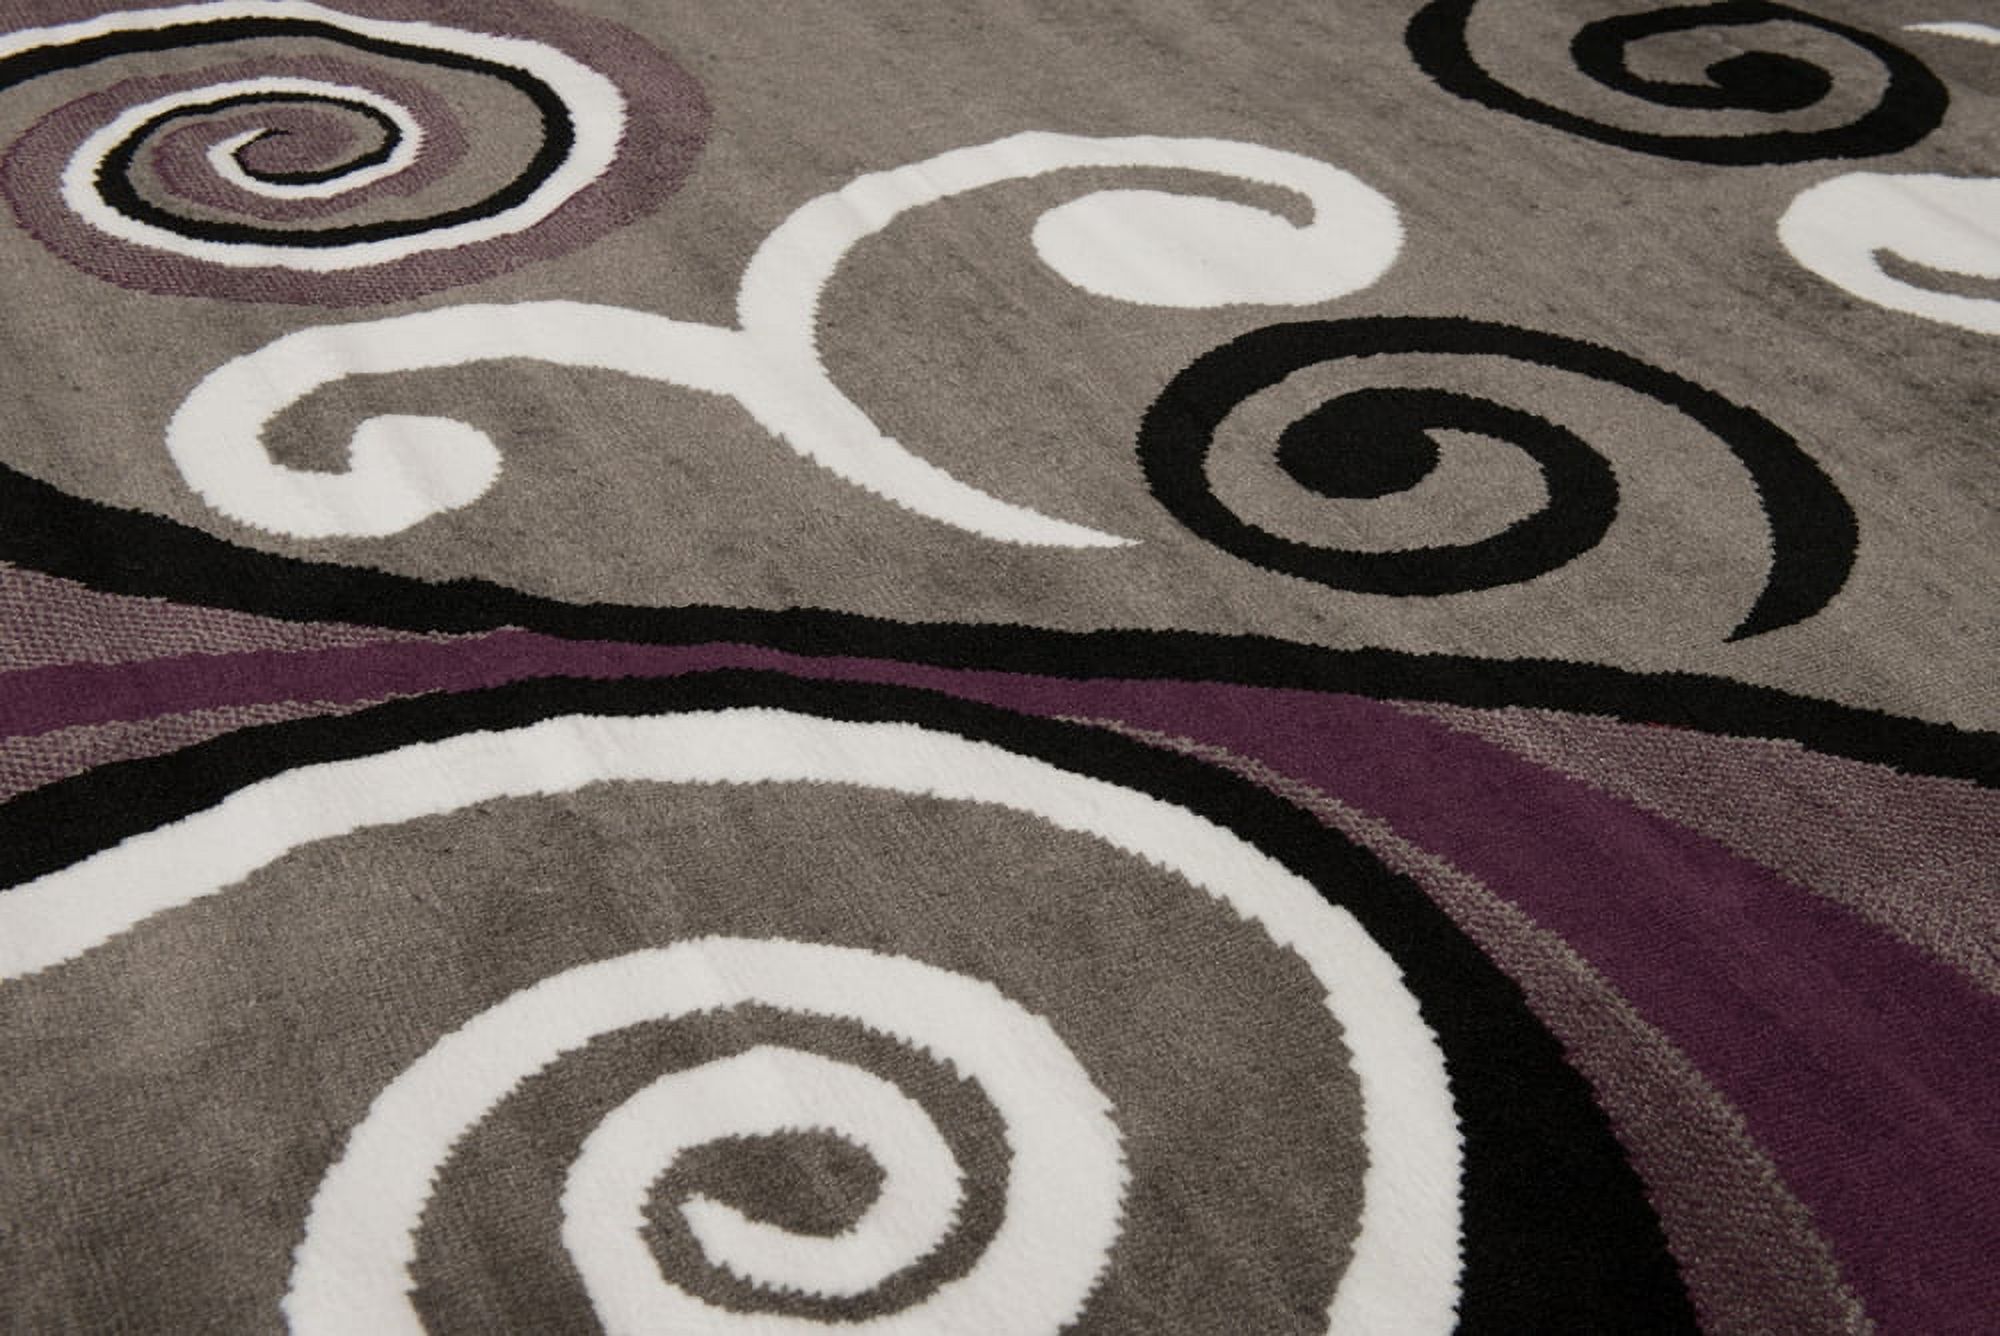 Designer Home Soft Transitional Indoor Modern Area Rug Curvy Swirls  - Actual Size: 5' 3" x 7' 2" Rectangle (Grey) - image 3 of 5